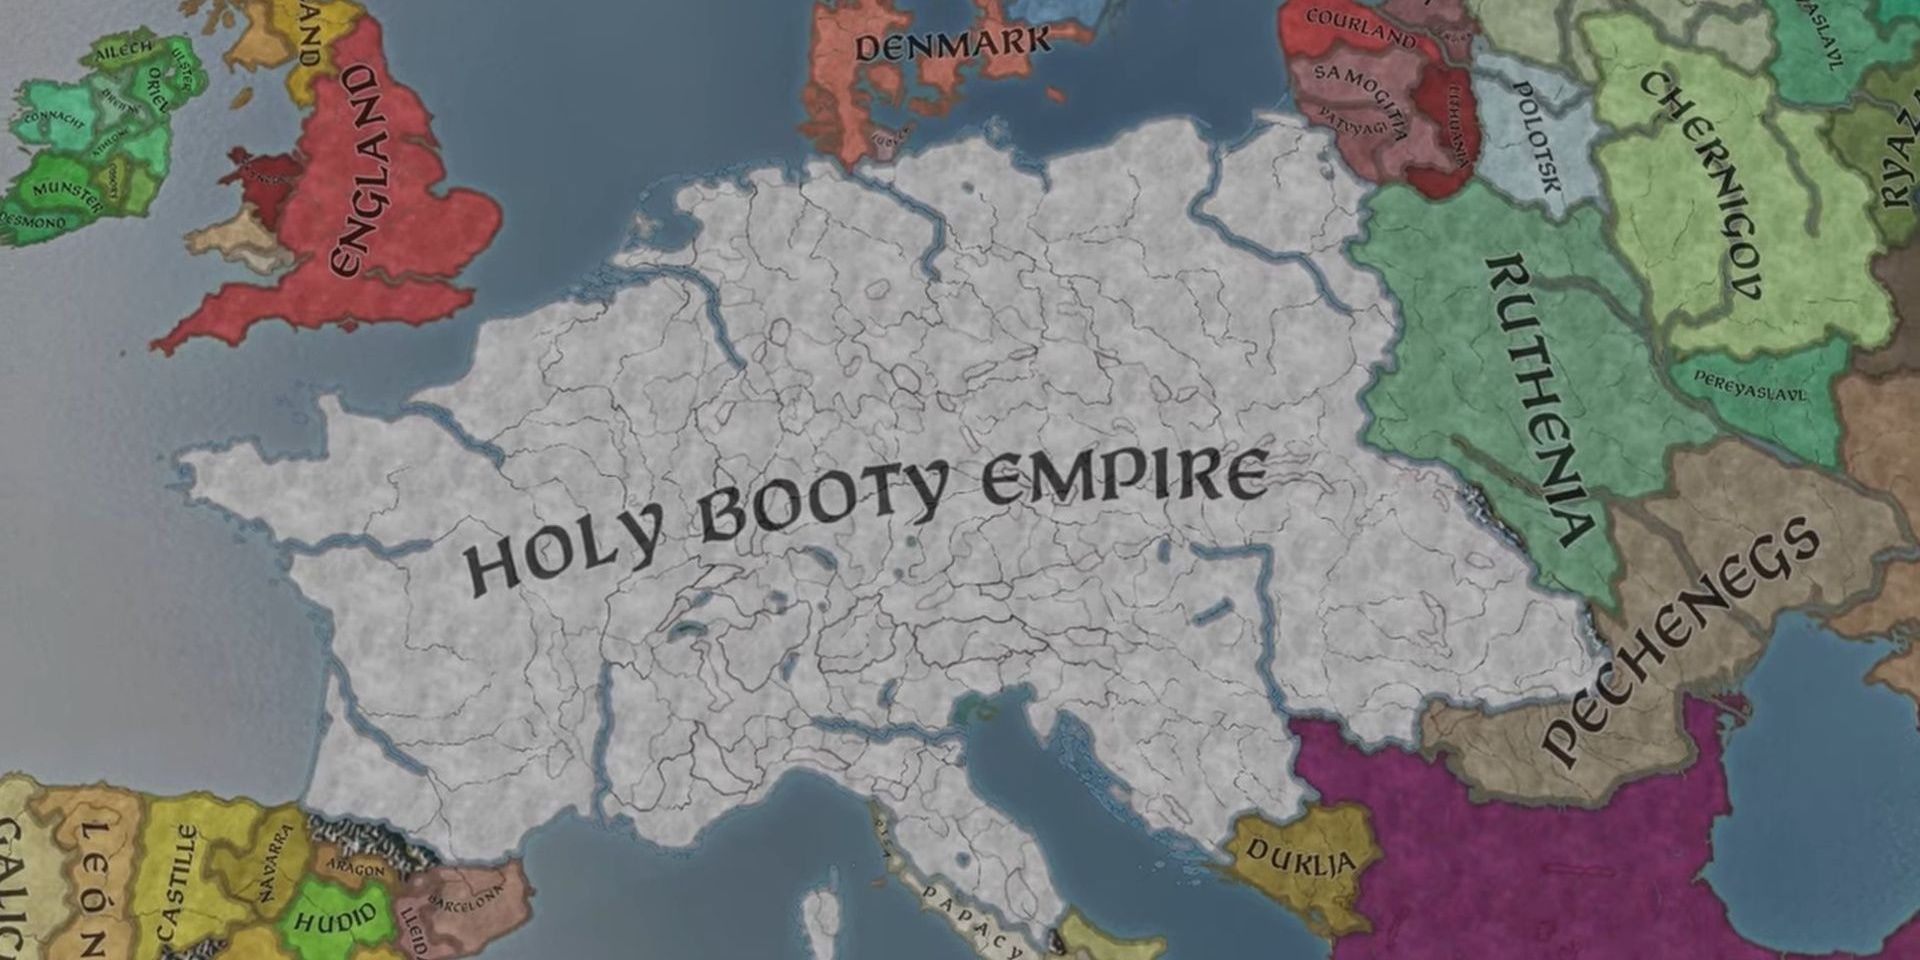 new faith as depicted in Crusader Kingds 3